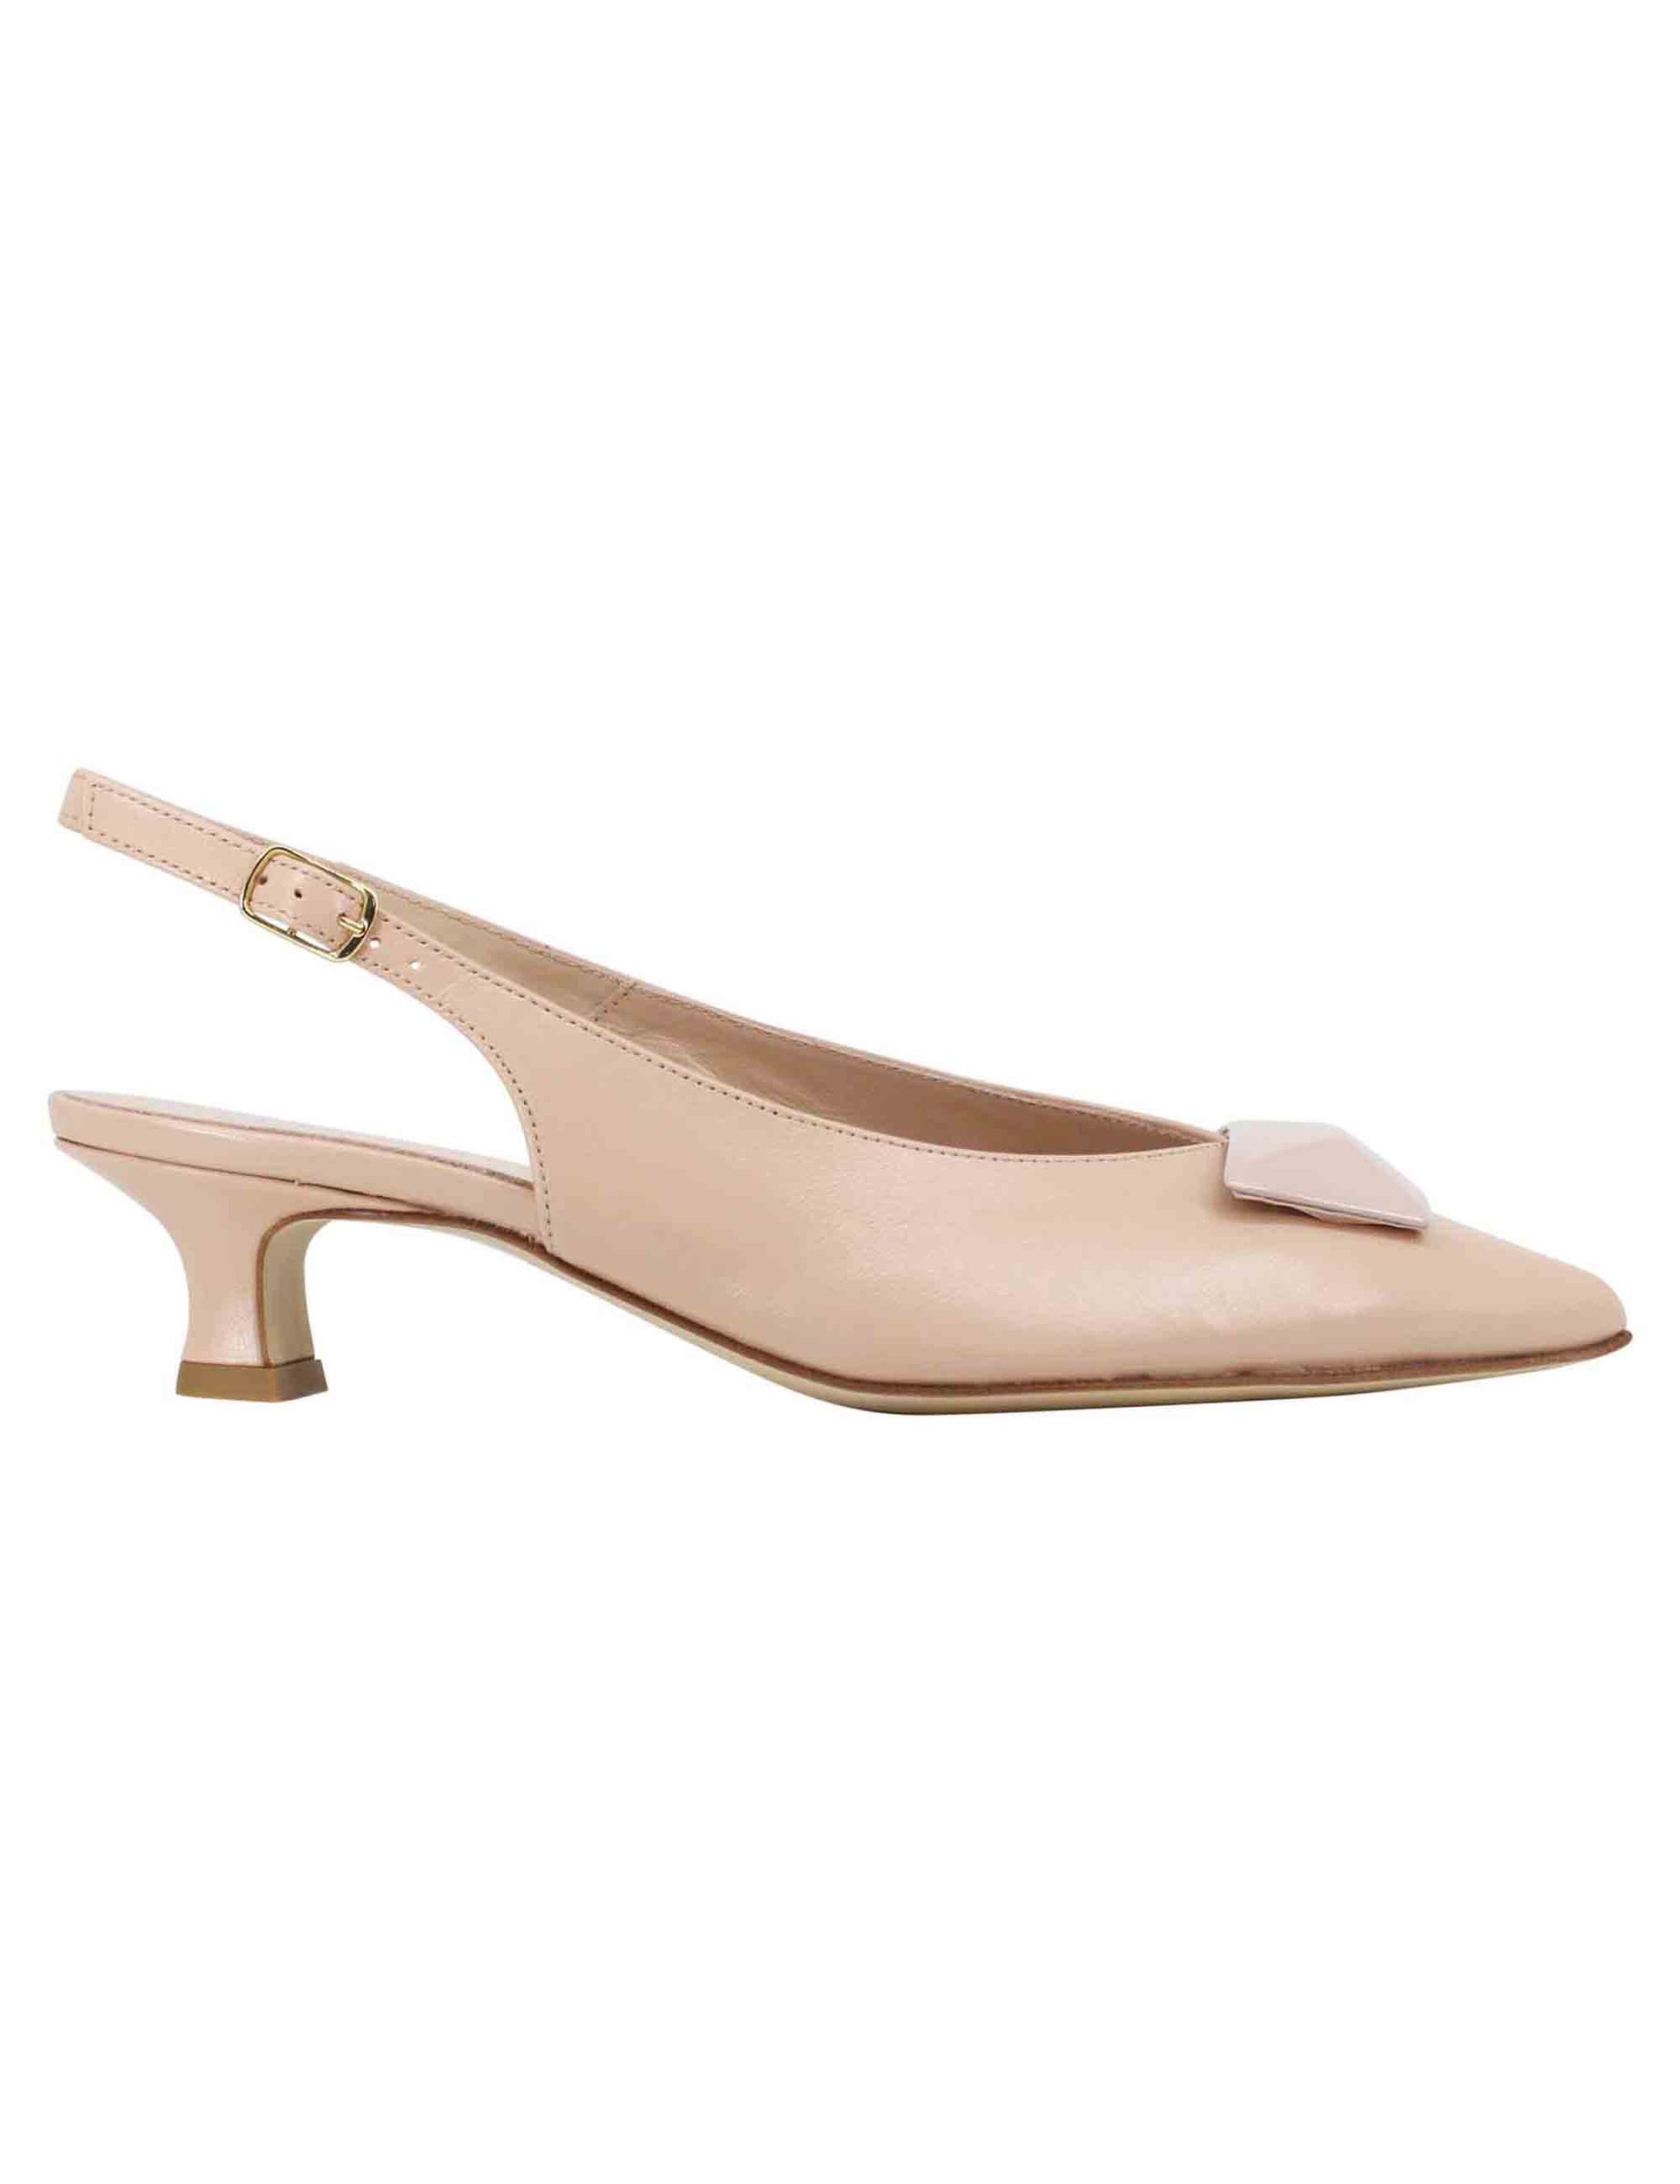 Women's slingback pumps in powder leather with low heel and matching accessory